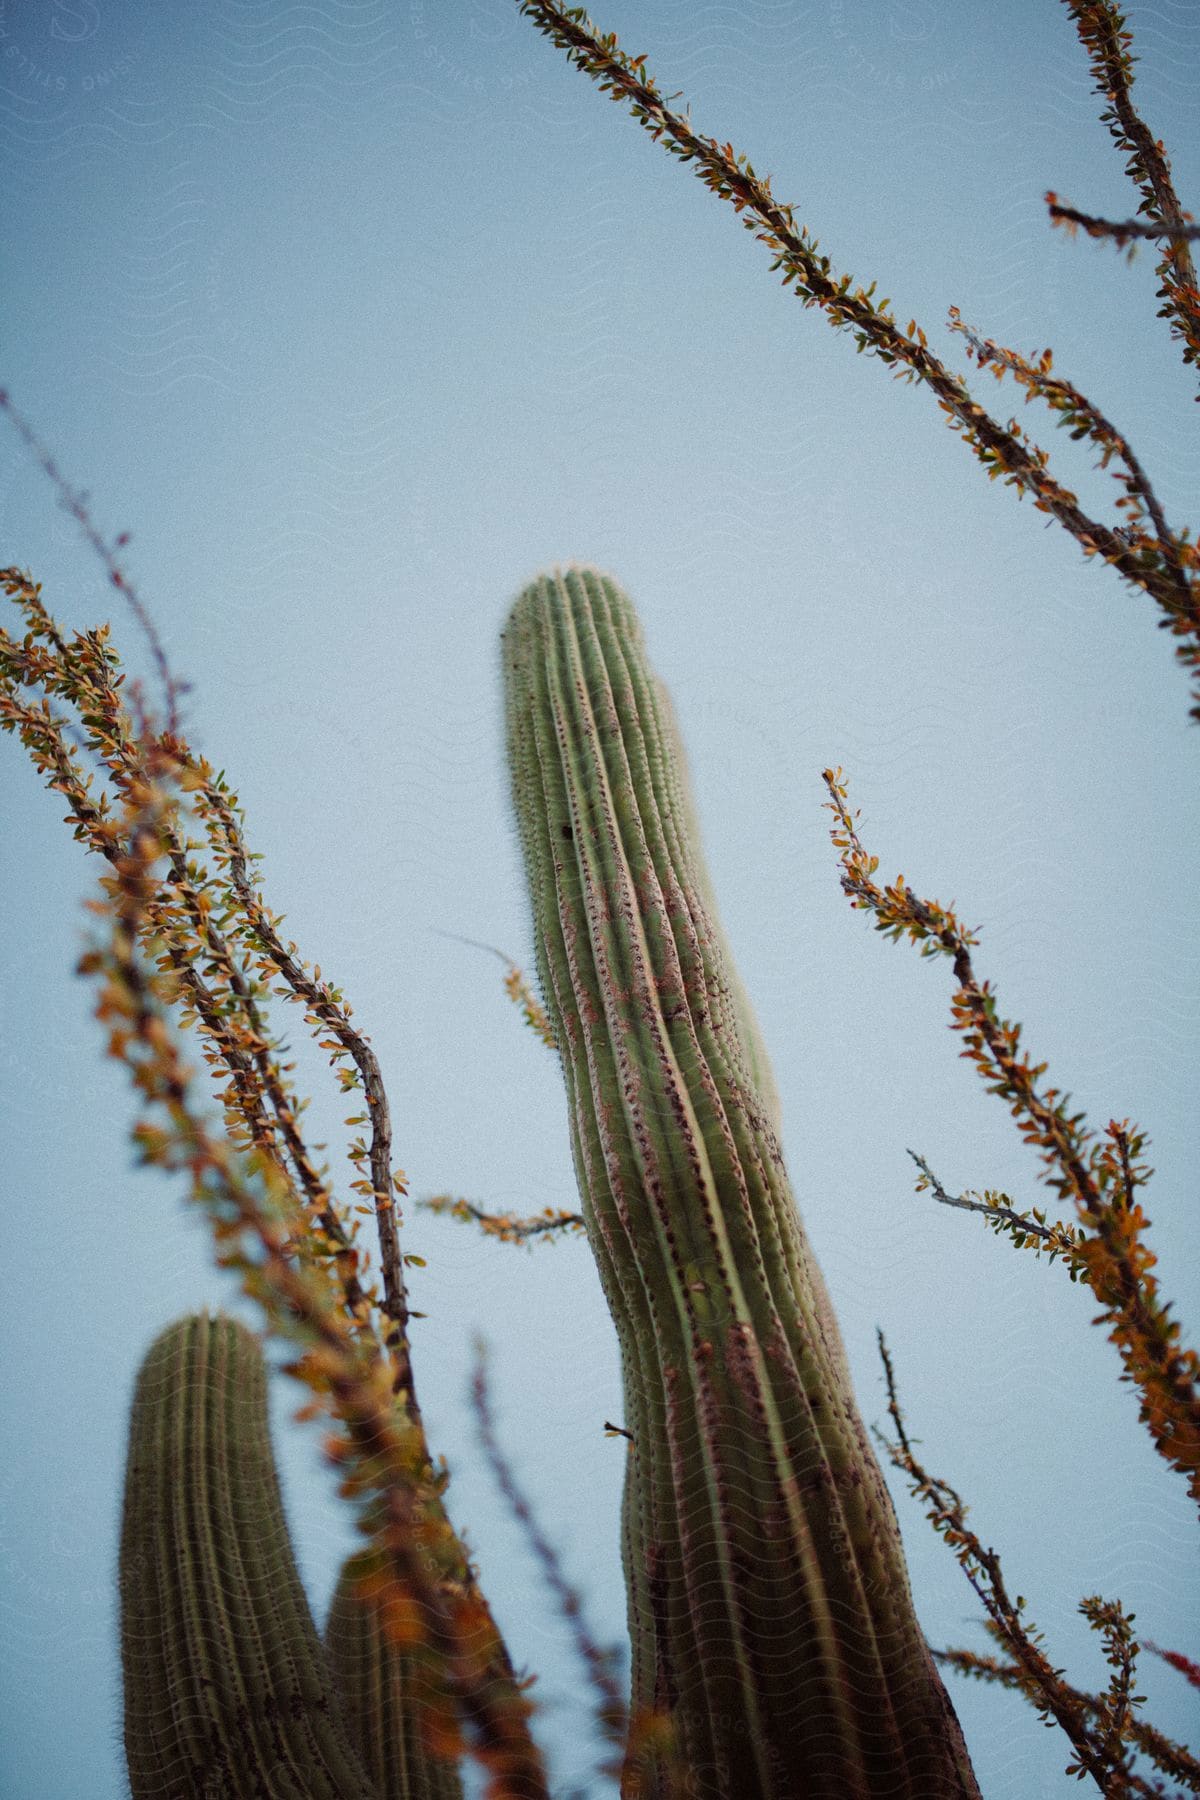 Cactus with blooming flowers reaching towards the sunny sky in the desert